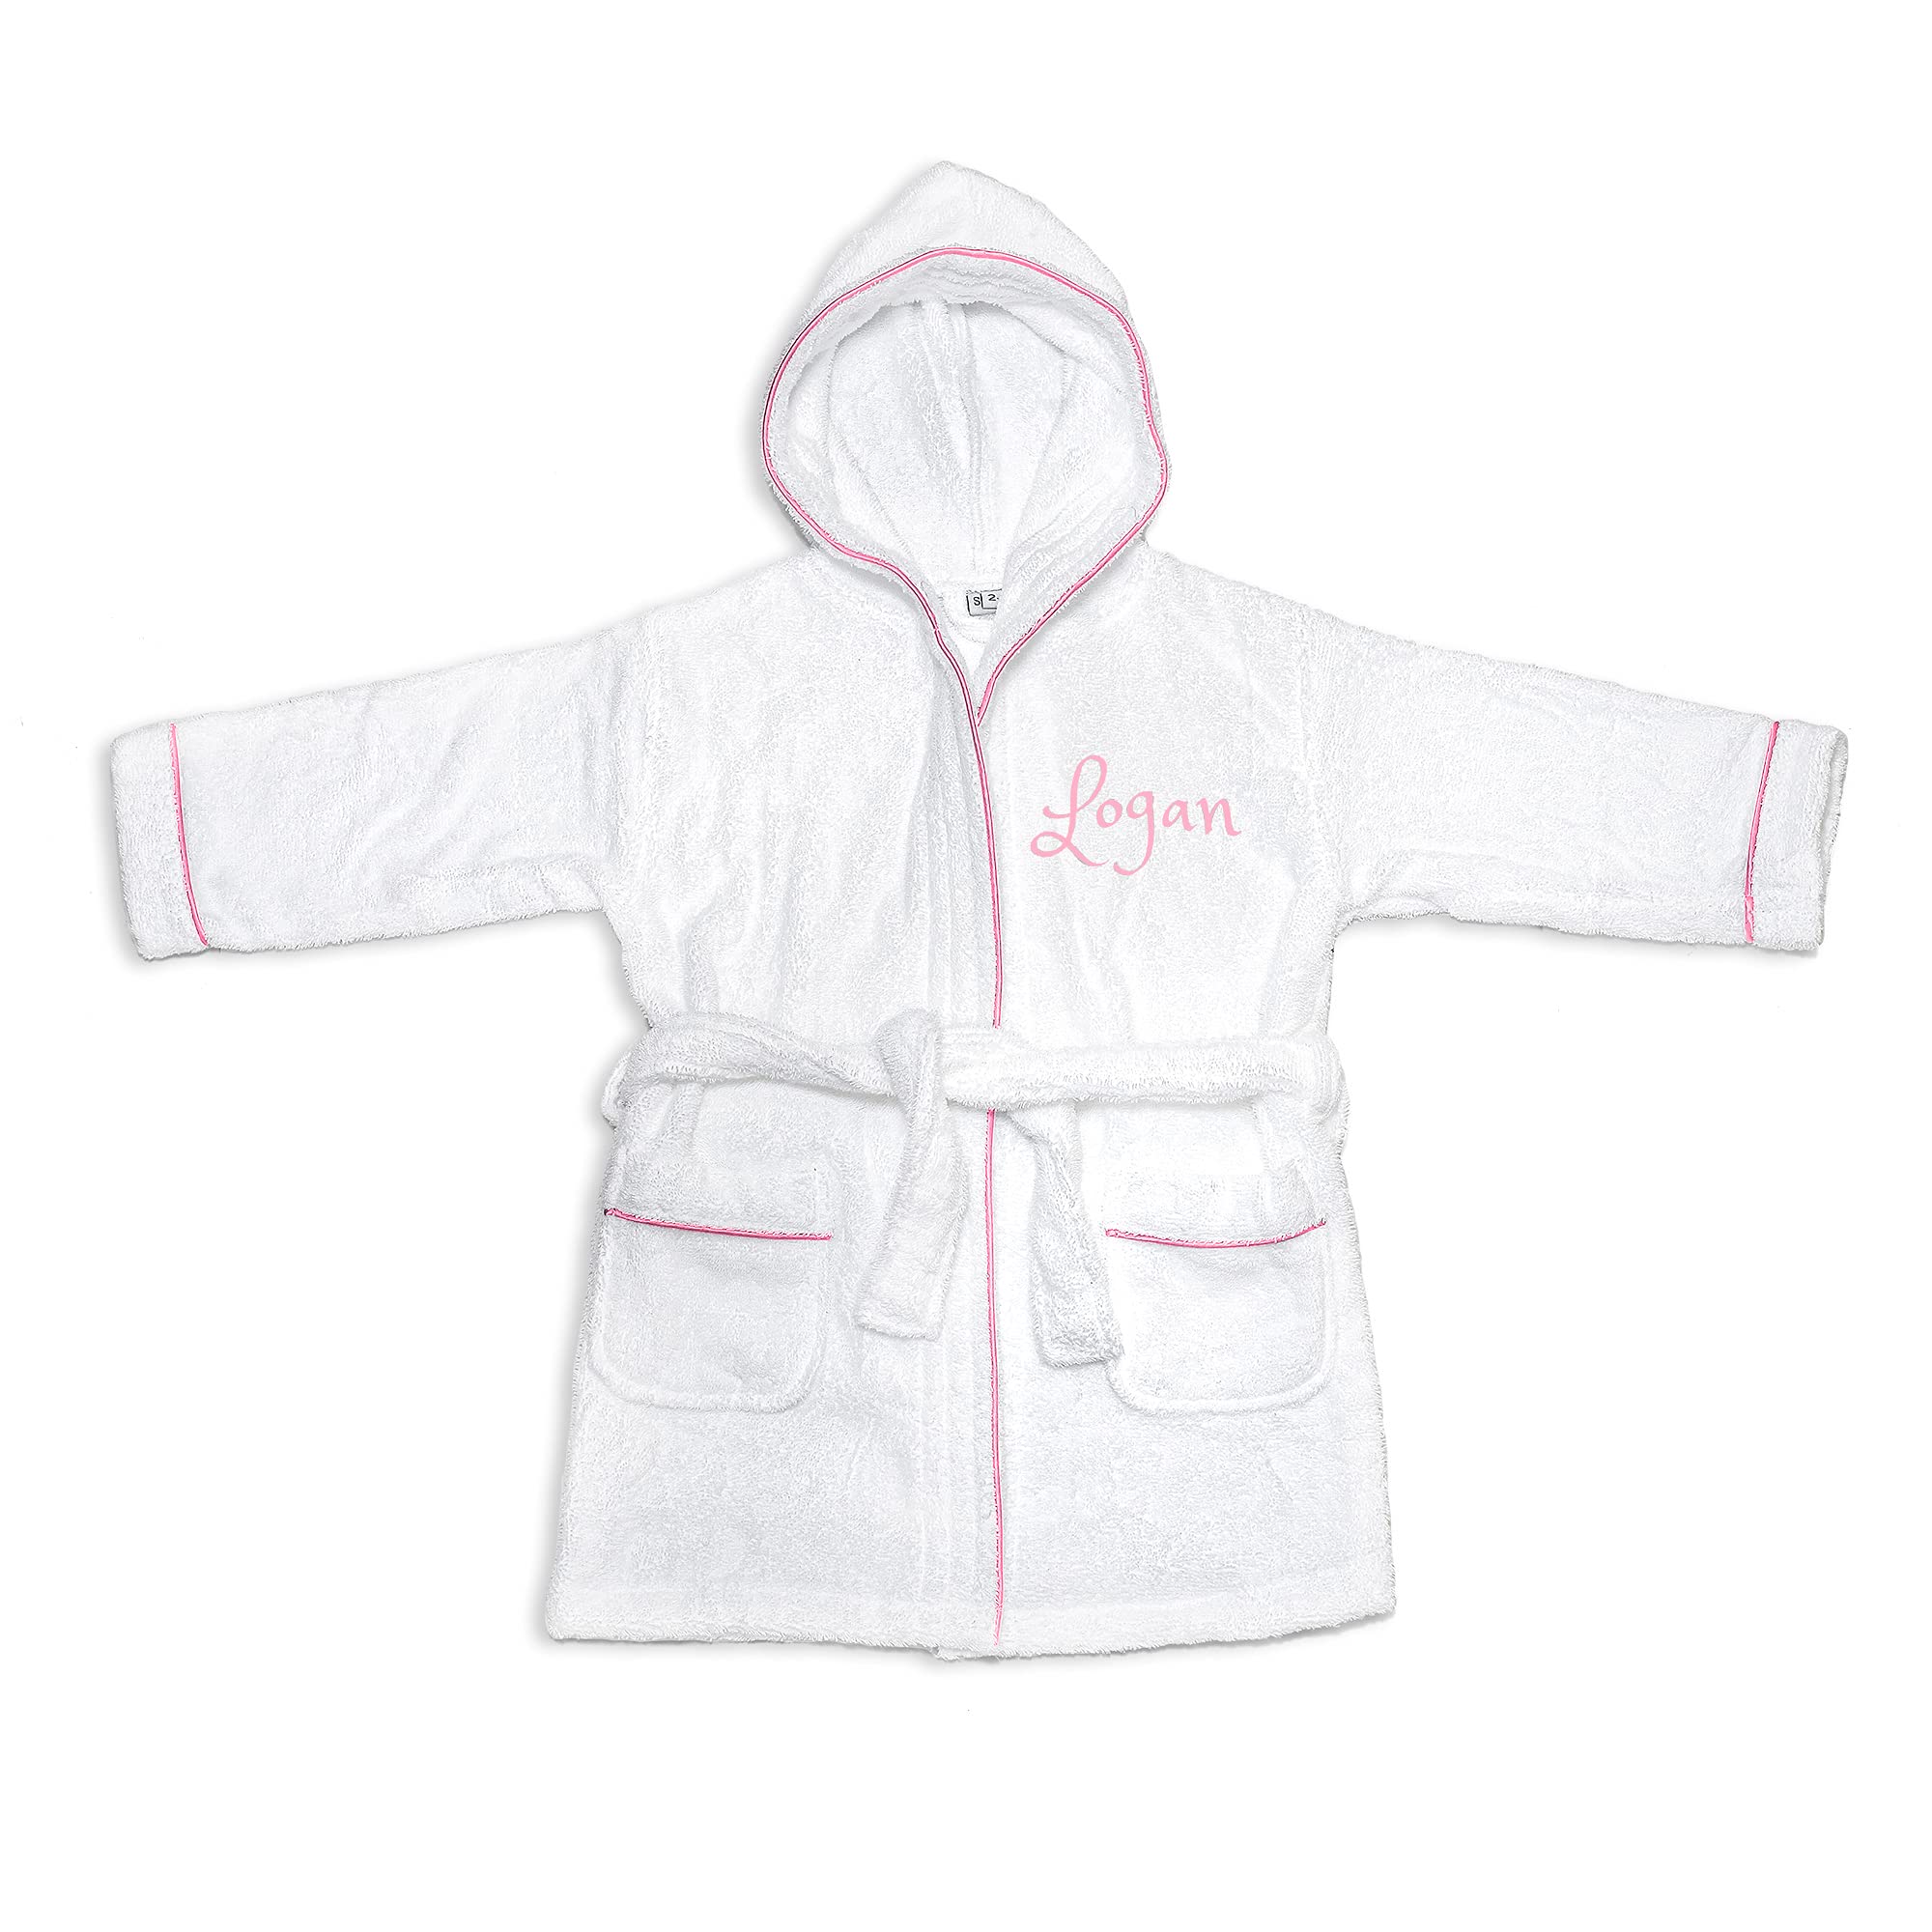 Dream Embroidery PERSONALIZED Baby Bathrobe -Toddler Bath robe custom Monogram Embroidered Terry Robe (Pink, 1-2 Years)